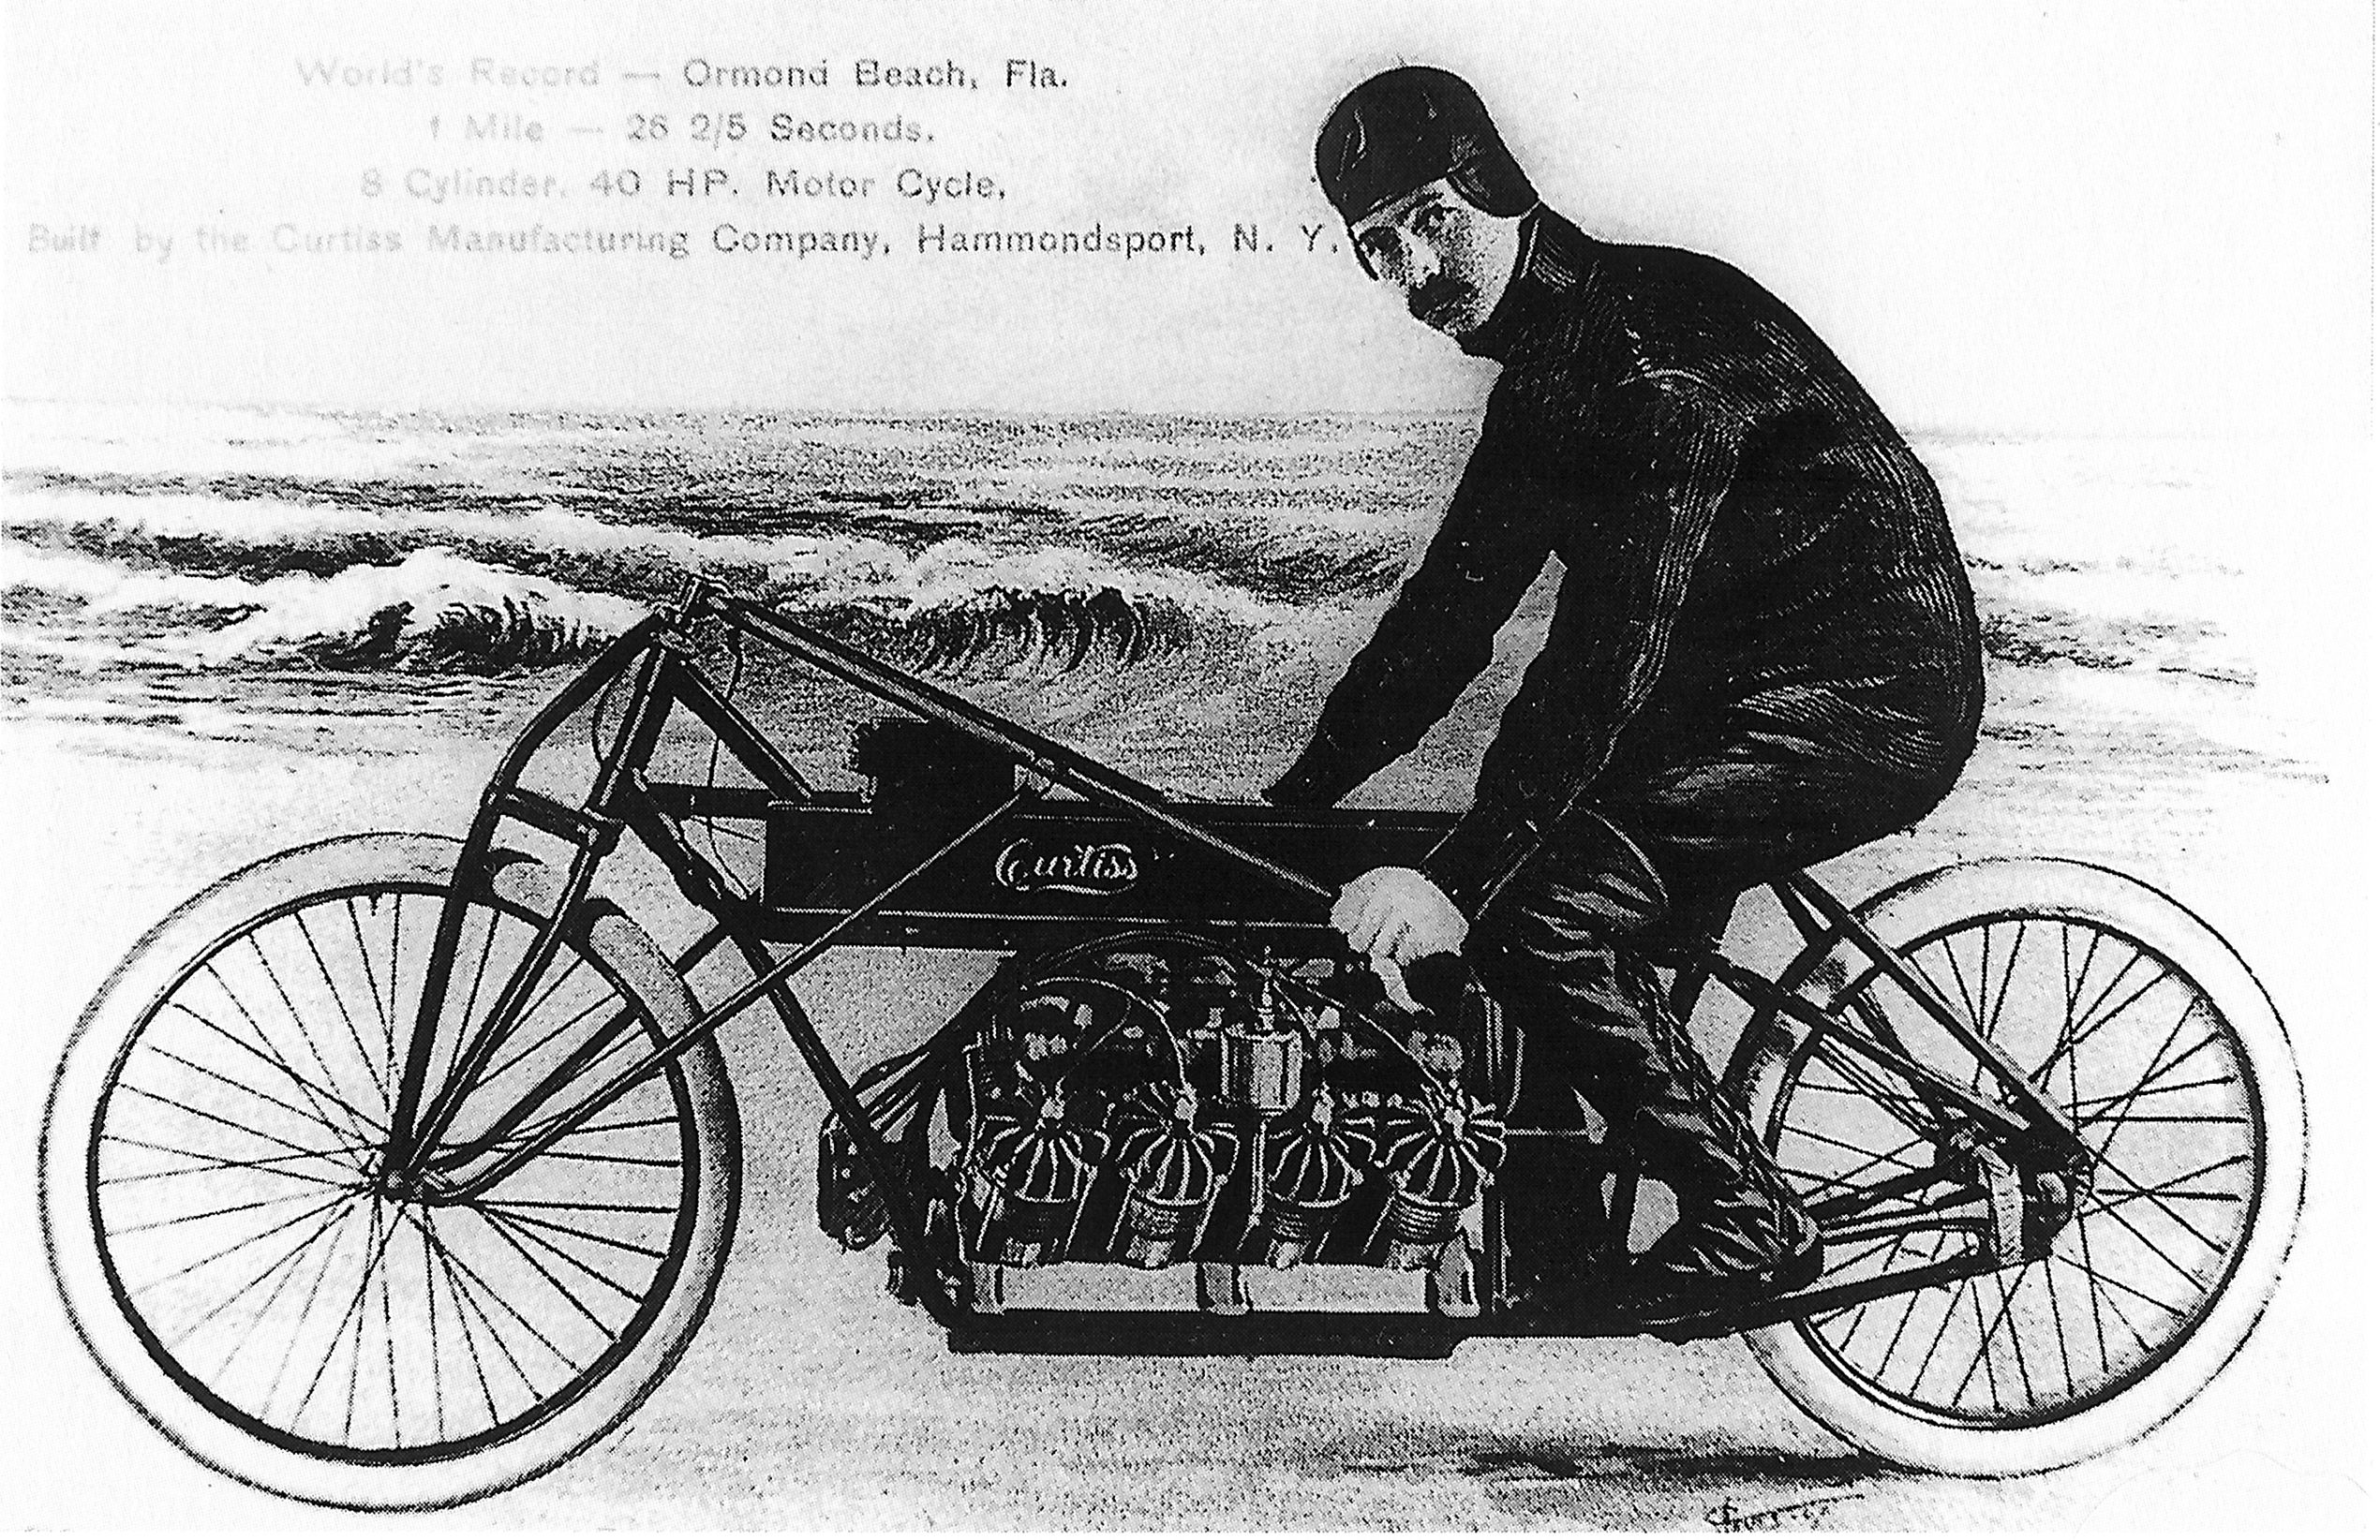 The first V8 Motorcycle